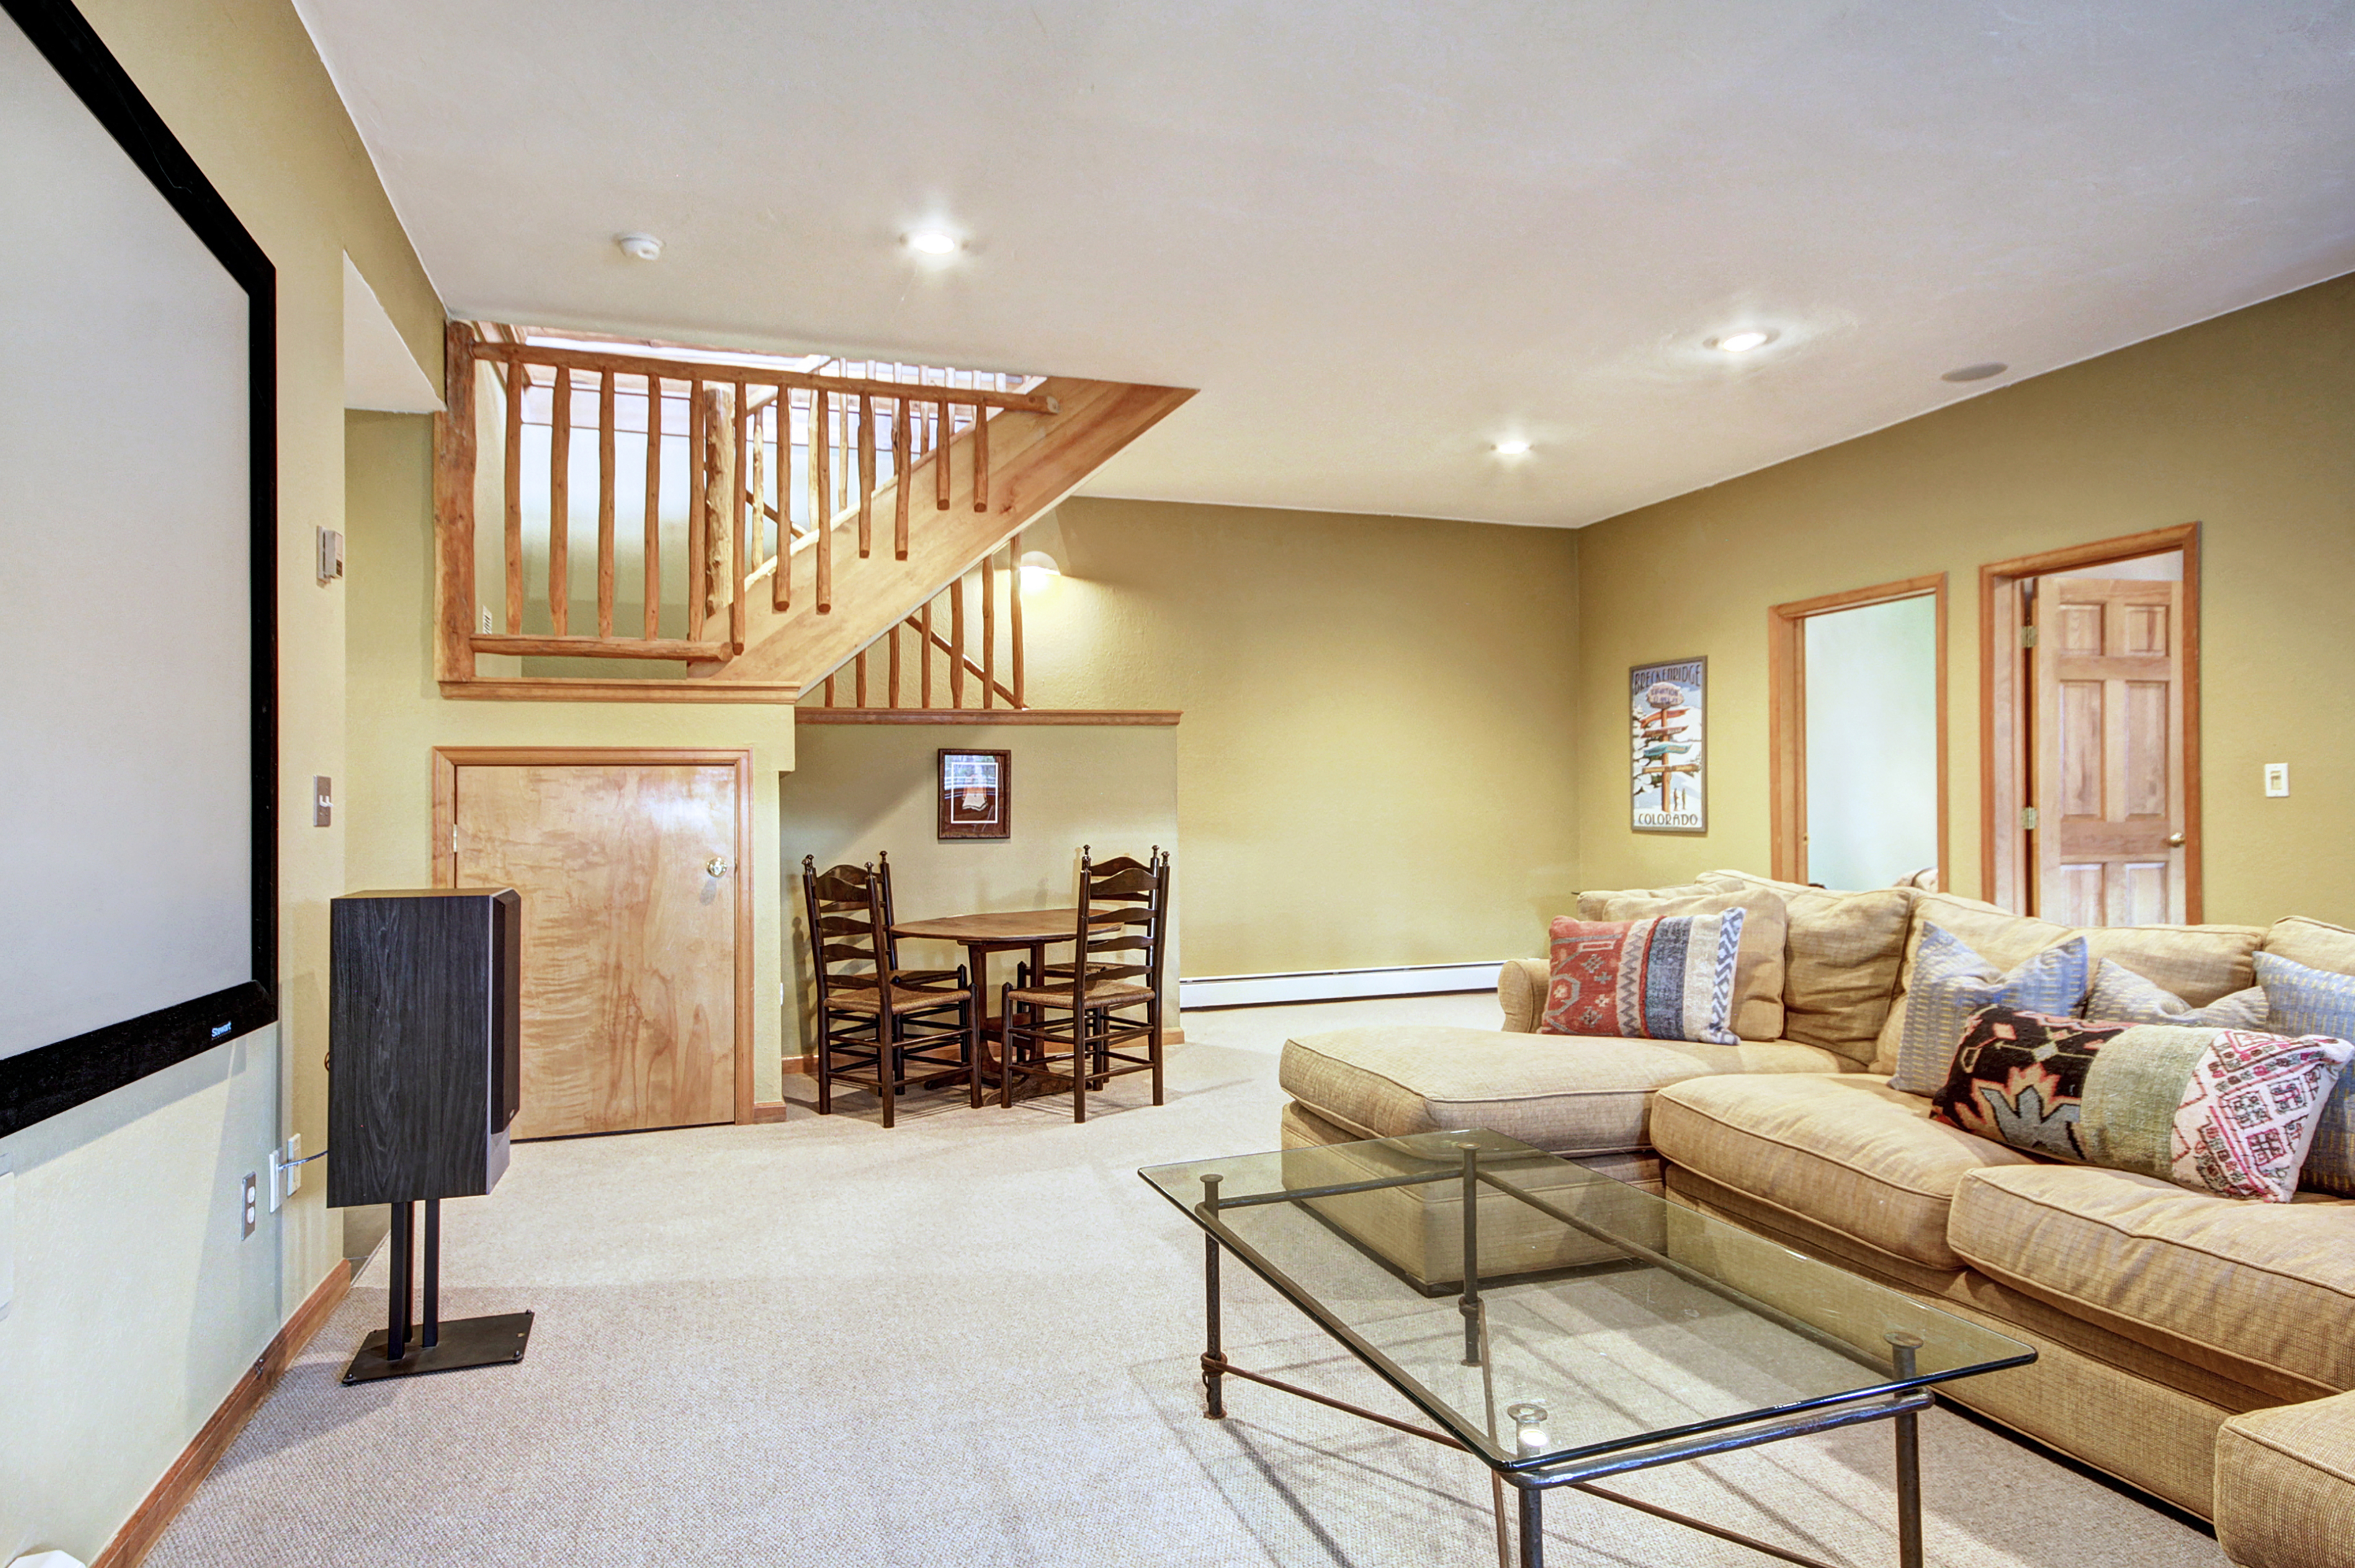 Additional view of lower level family room with game table - 10 Southface Breckenridge Vacation Rental